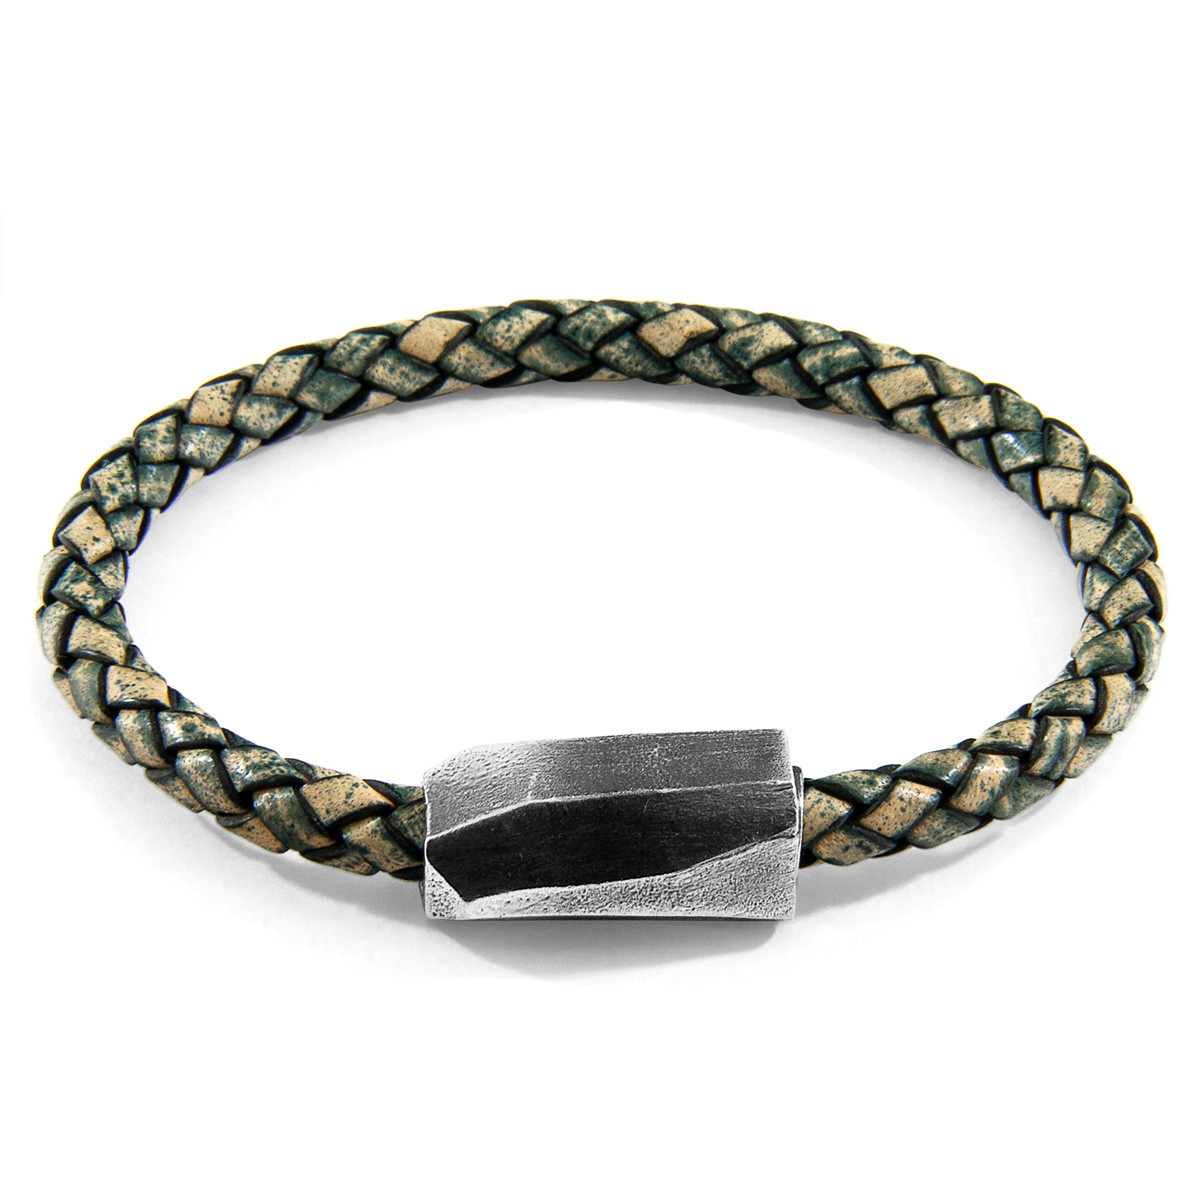 Anchor & Crew Petrol Green Hayling Silver and Braided Leather Bracelet